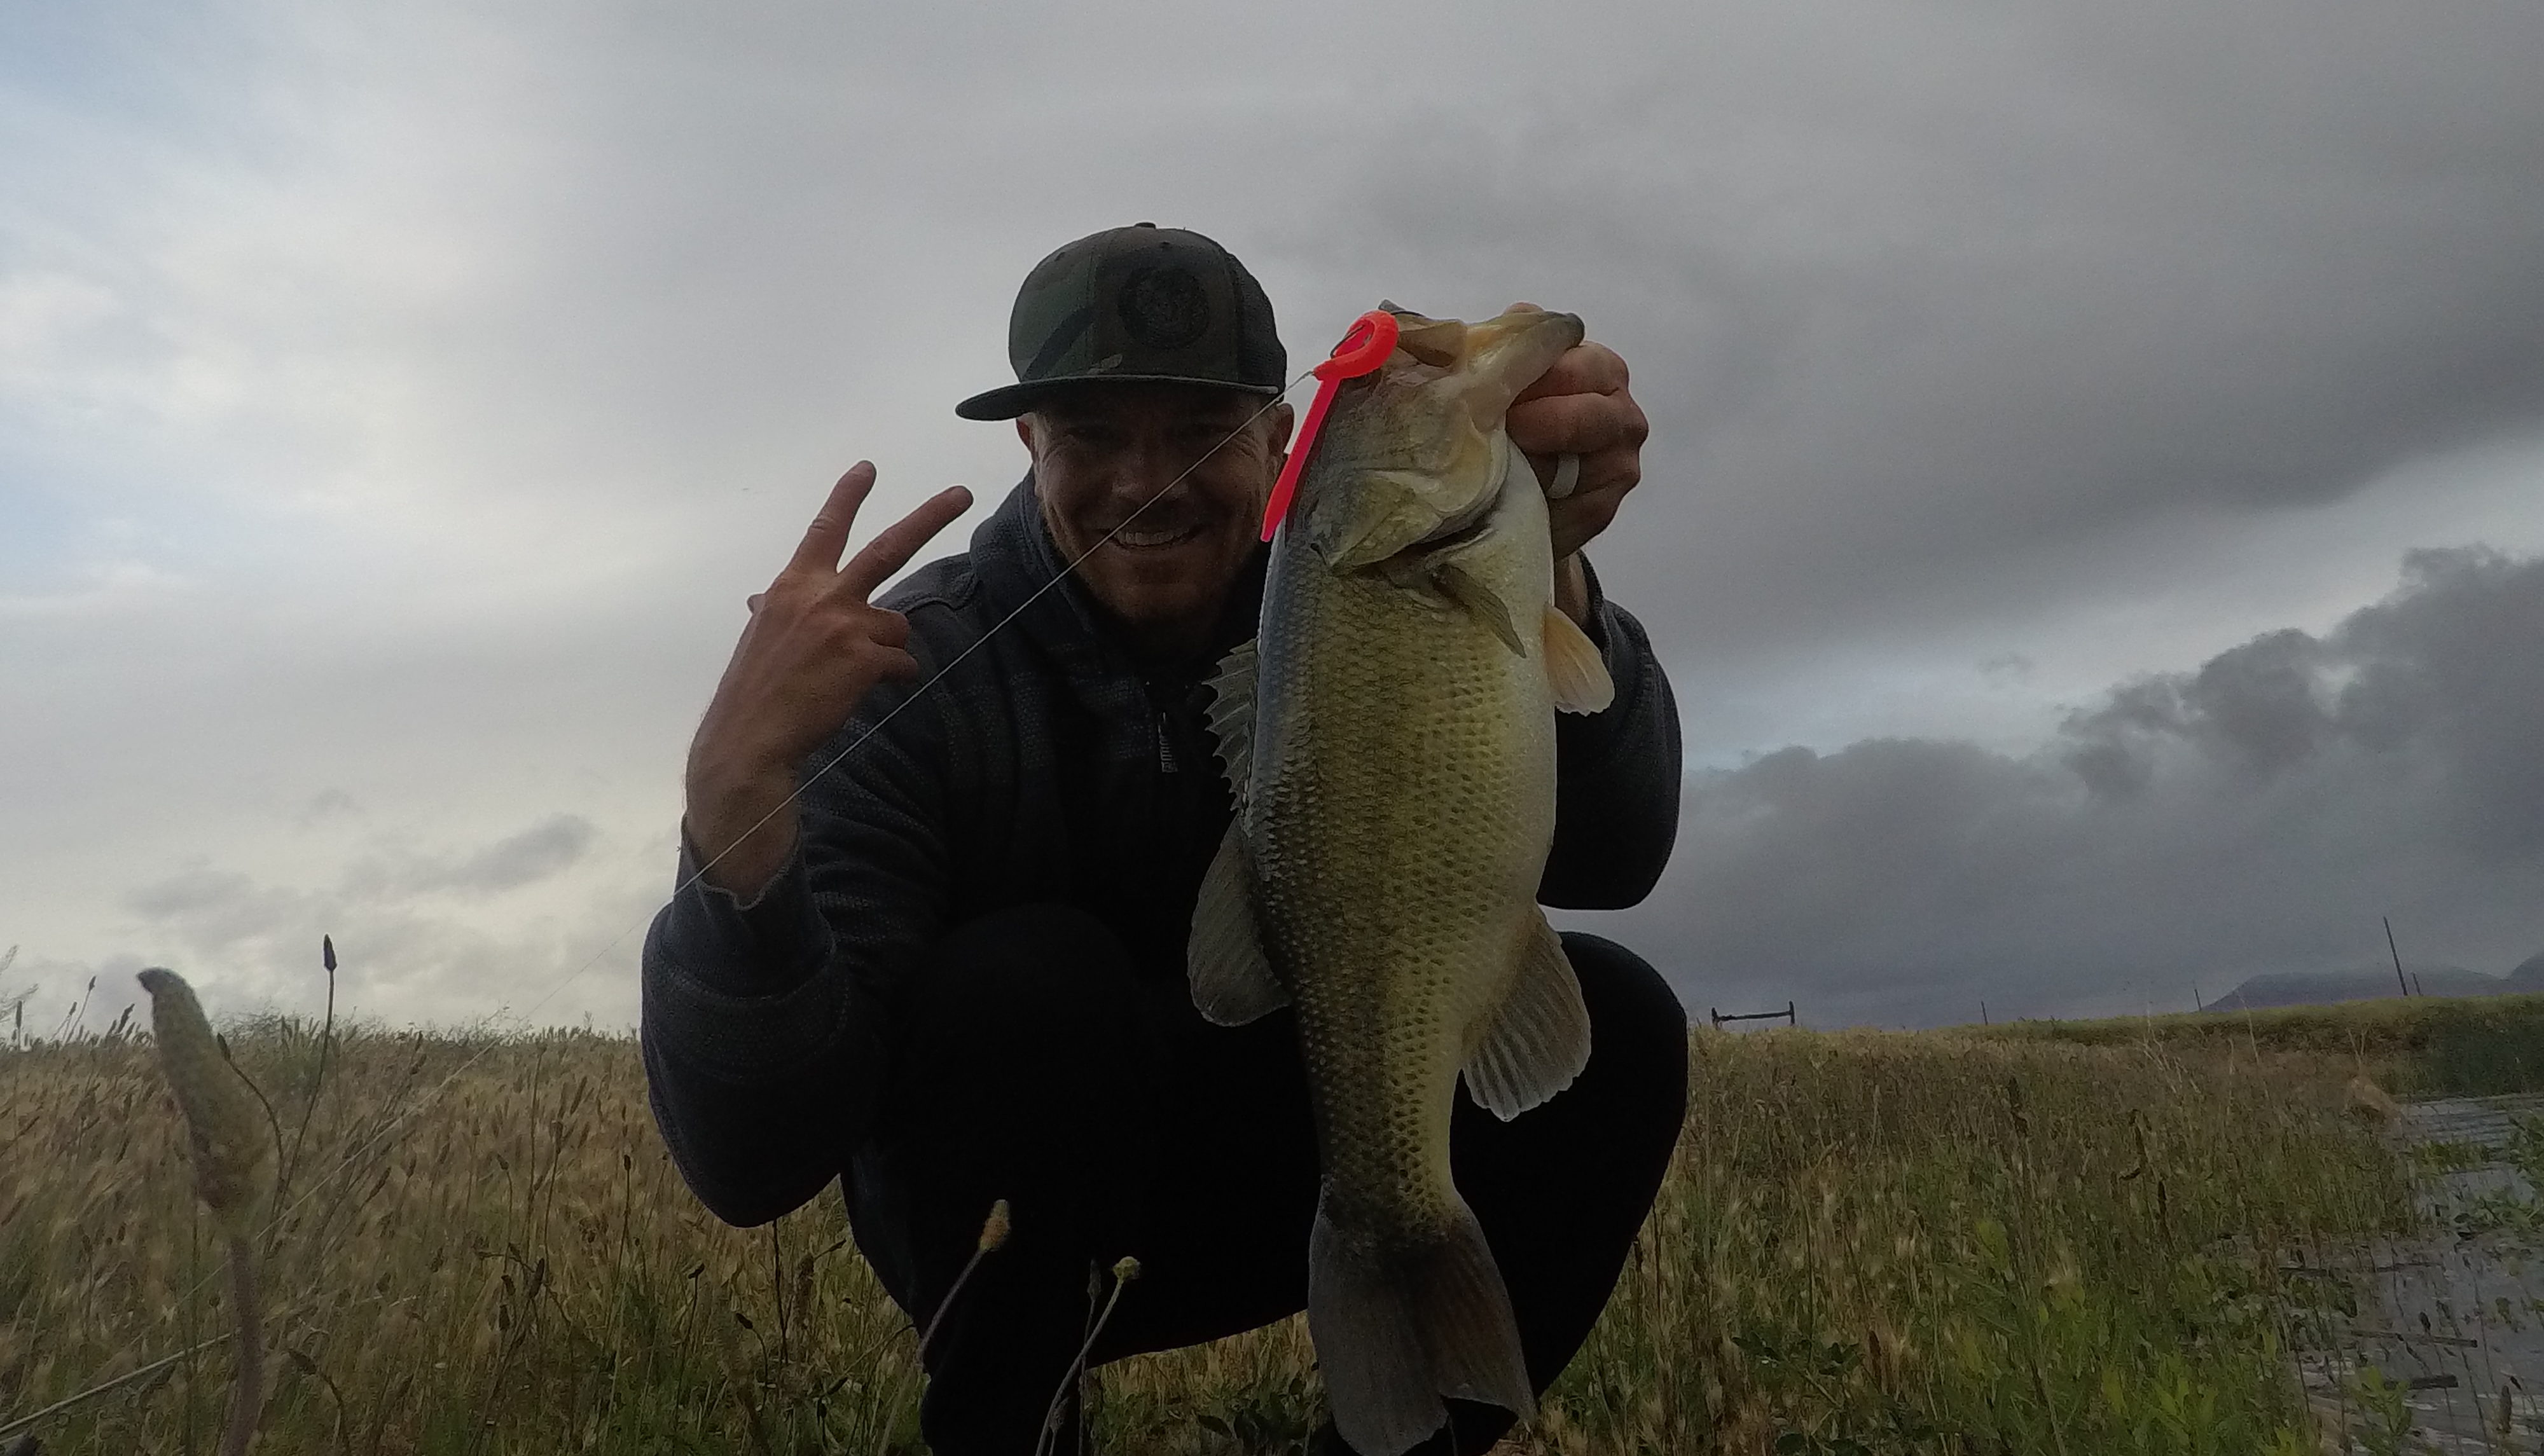 Rig a Trick Worm Like THIS to Catch MORE Bass! 